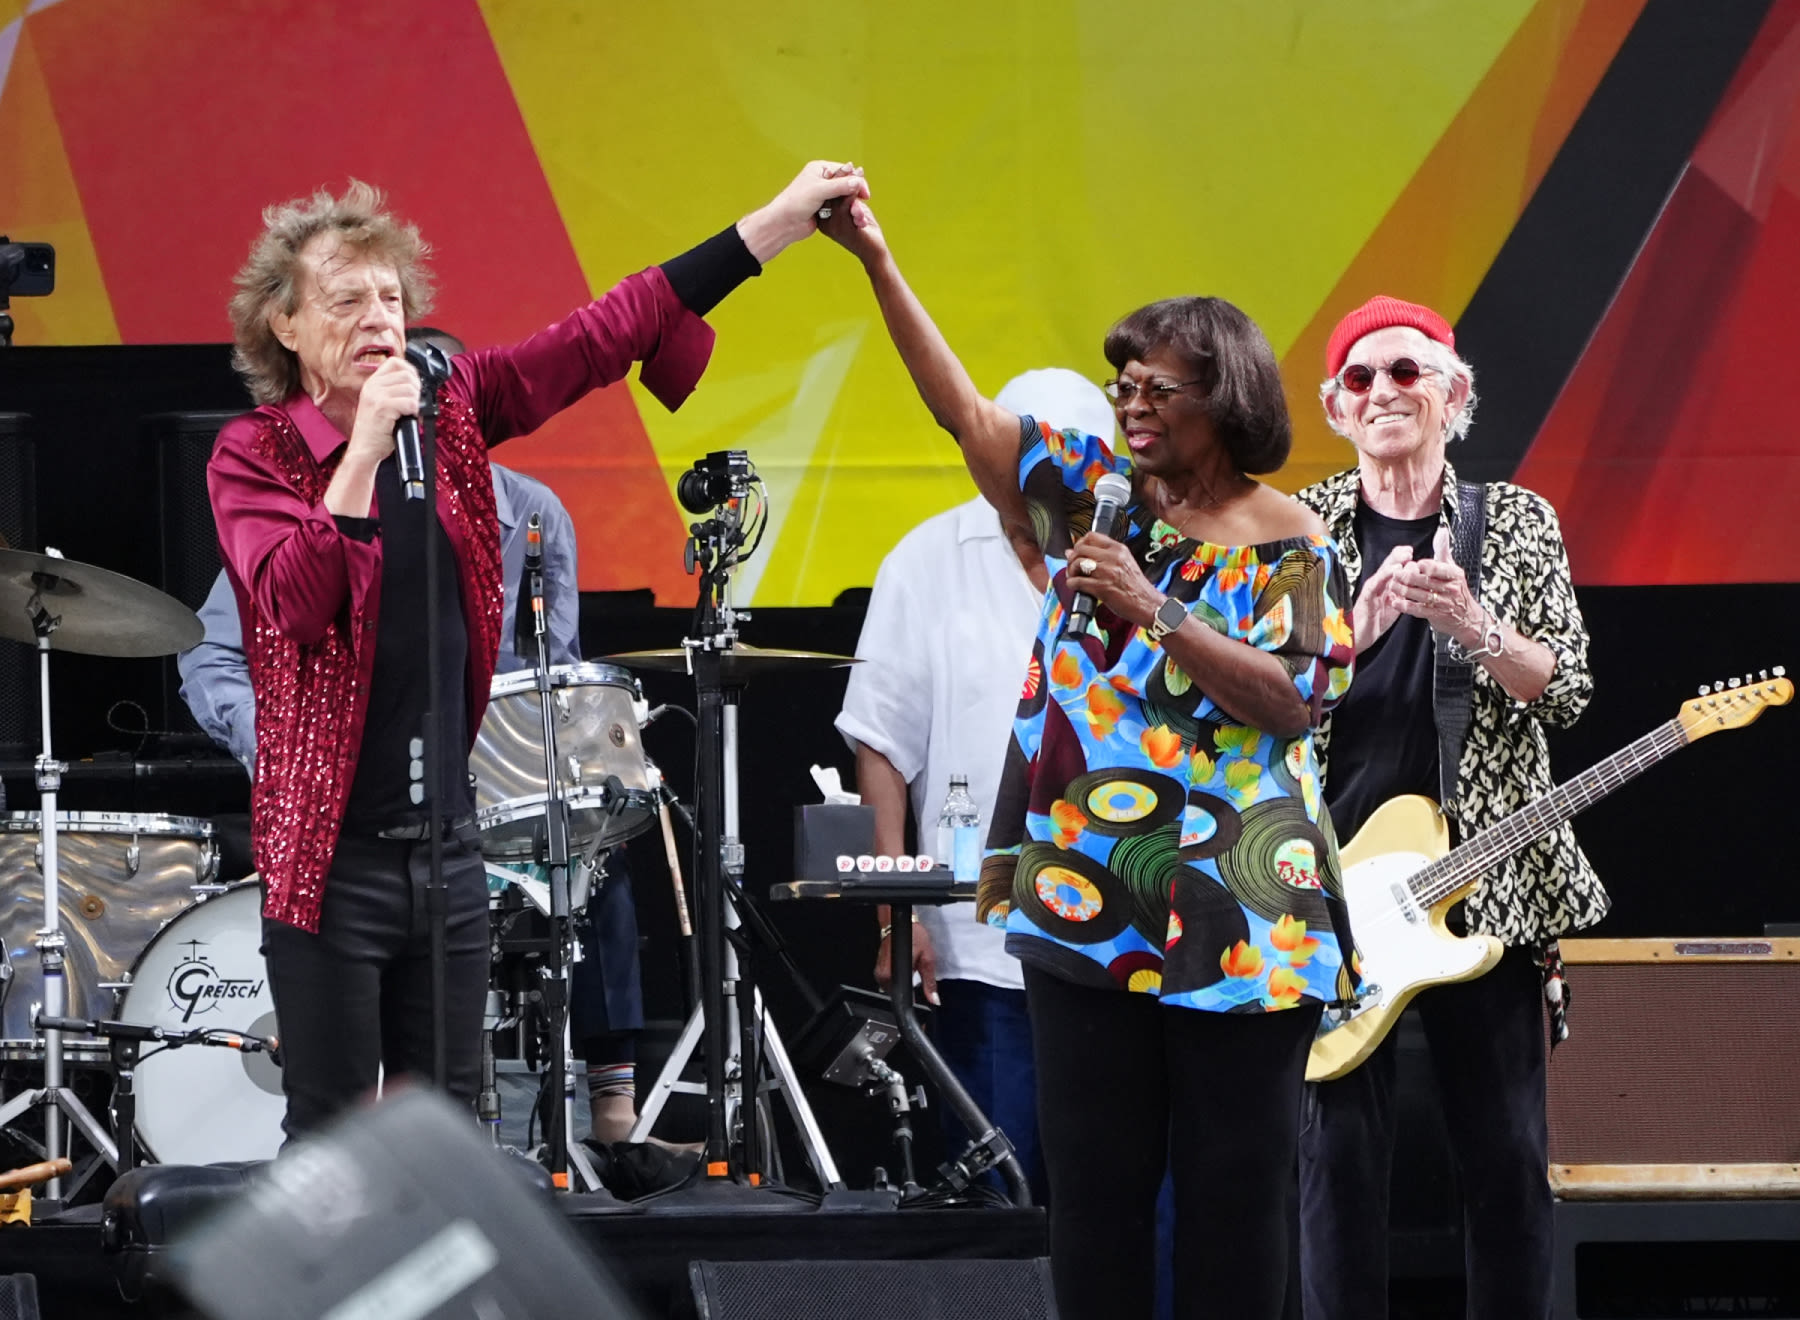 Watch the Rolling Stones Play ‘Time Is on My Side’ With Irma Thomas at Jazz Fest